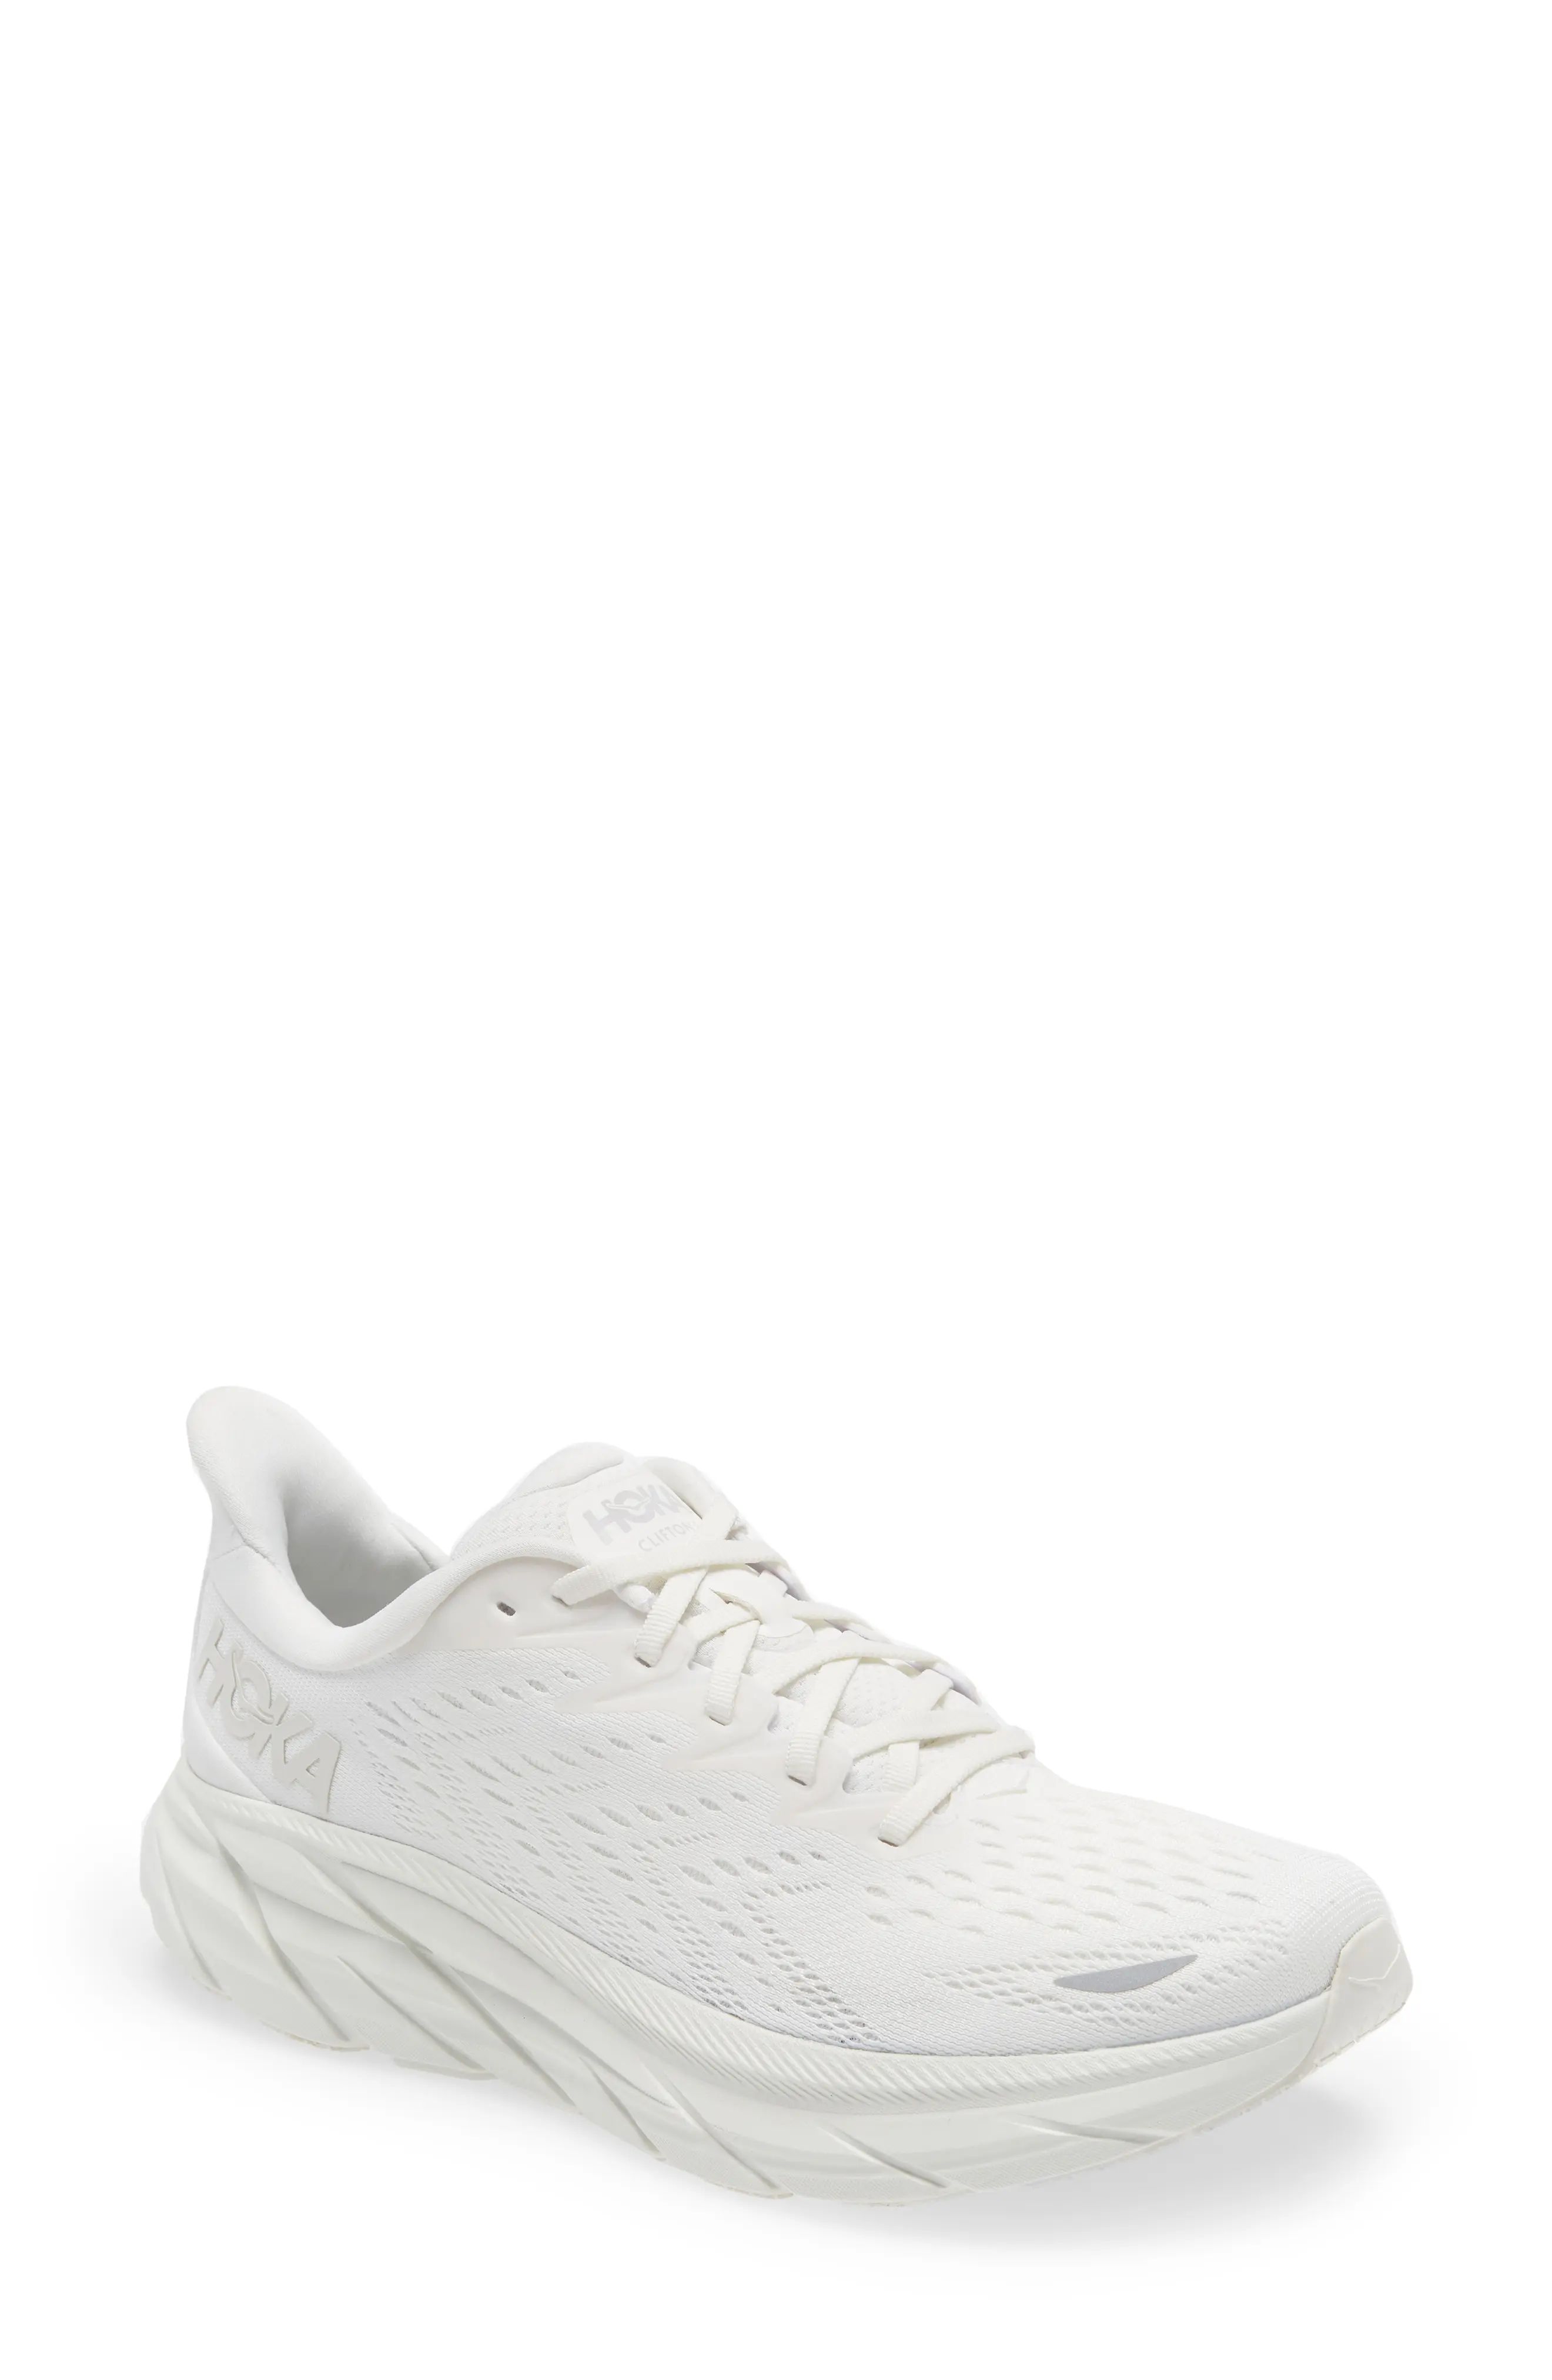 HOKA ONE ONE Clifton 8 Running Shoe in White at Nordstrom, Size 6.5 | Nordstrom